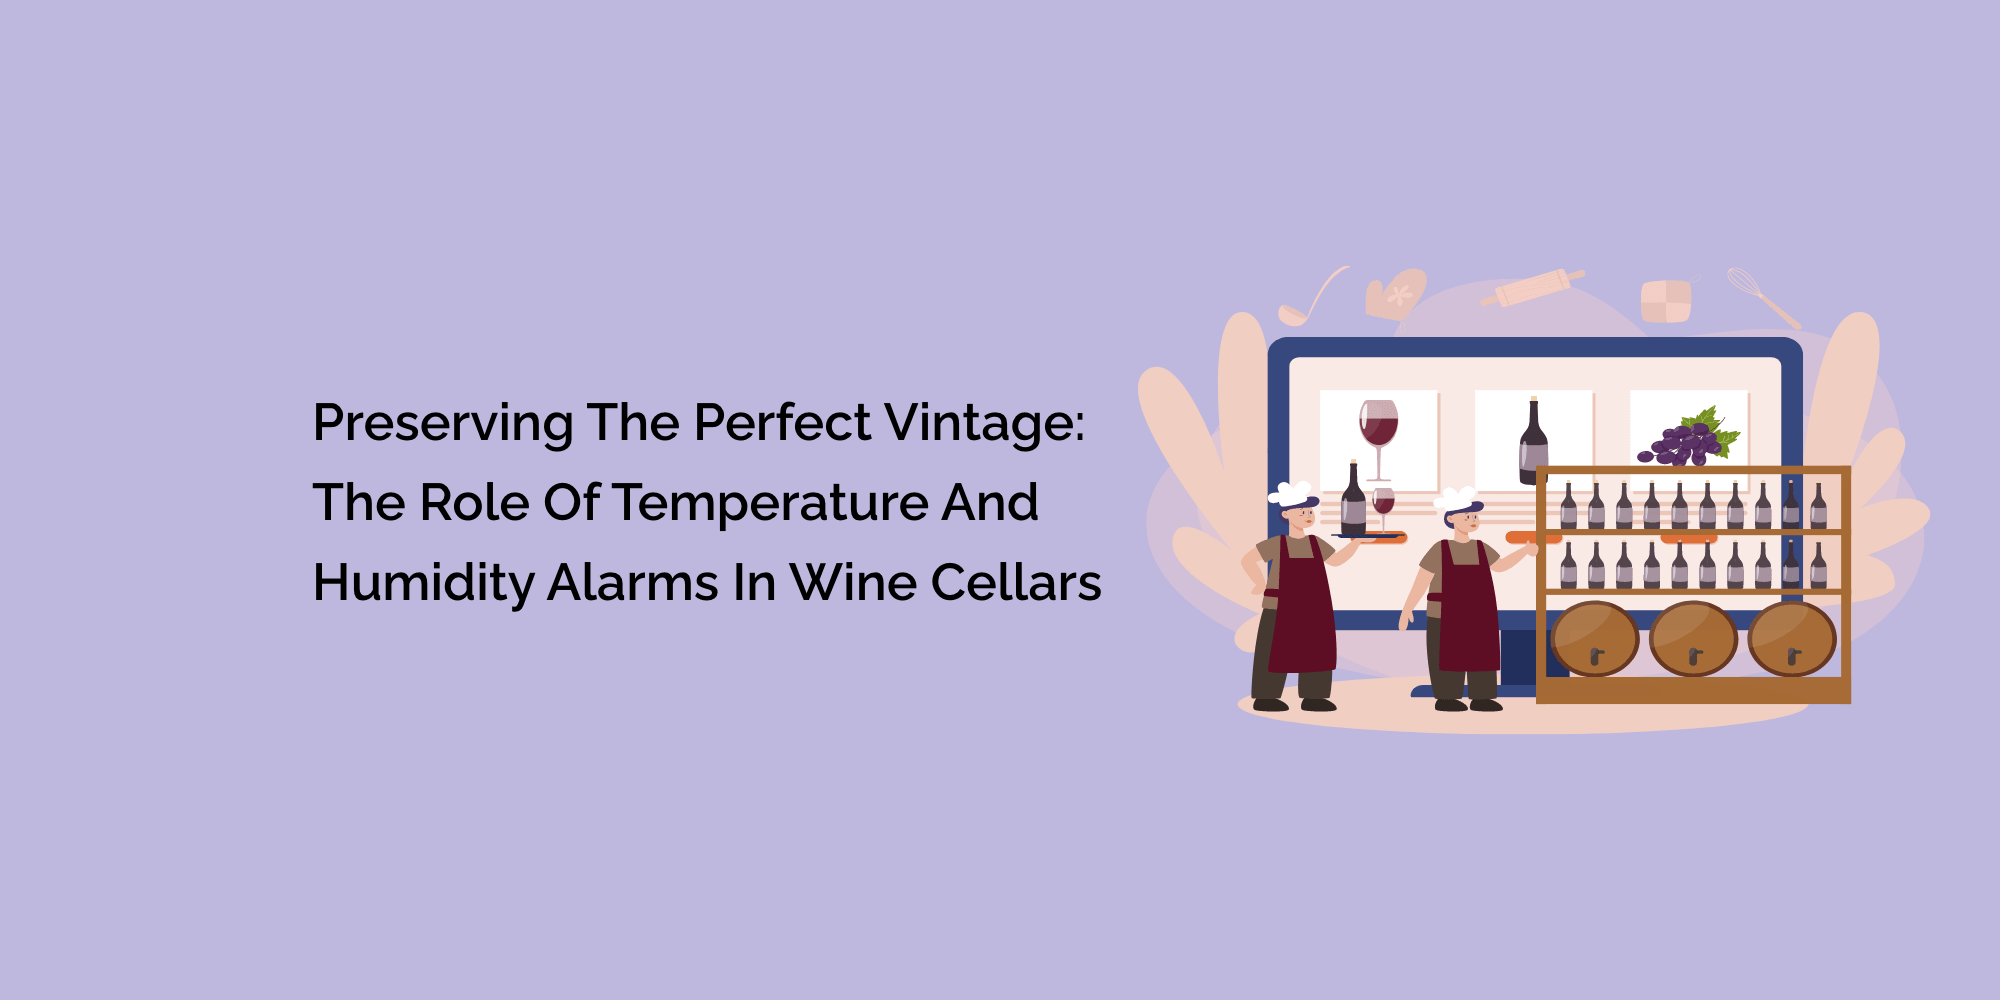 Preserving the Perfect Vintage: The Role of Temperature and Humidity Alarms in Wine Cellars